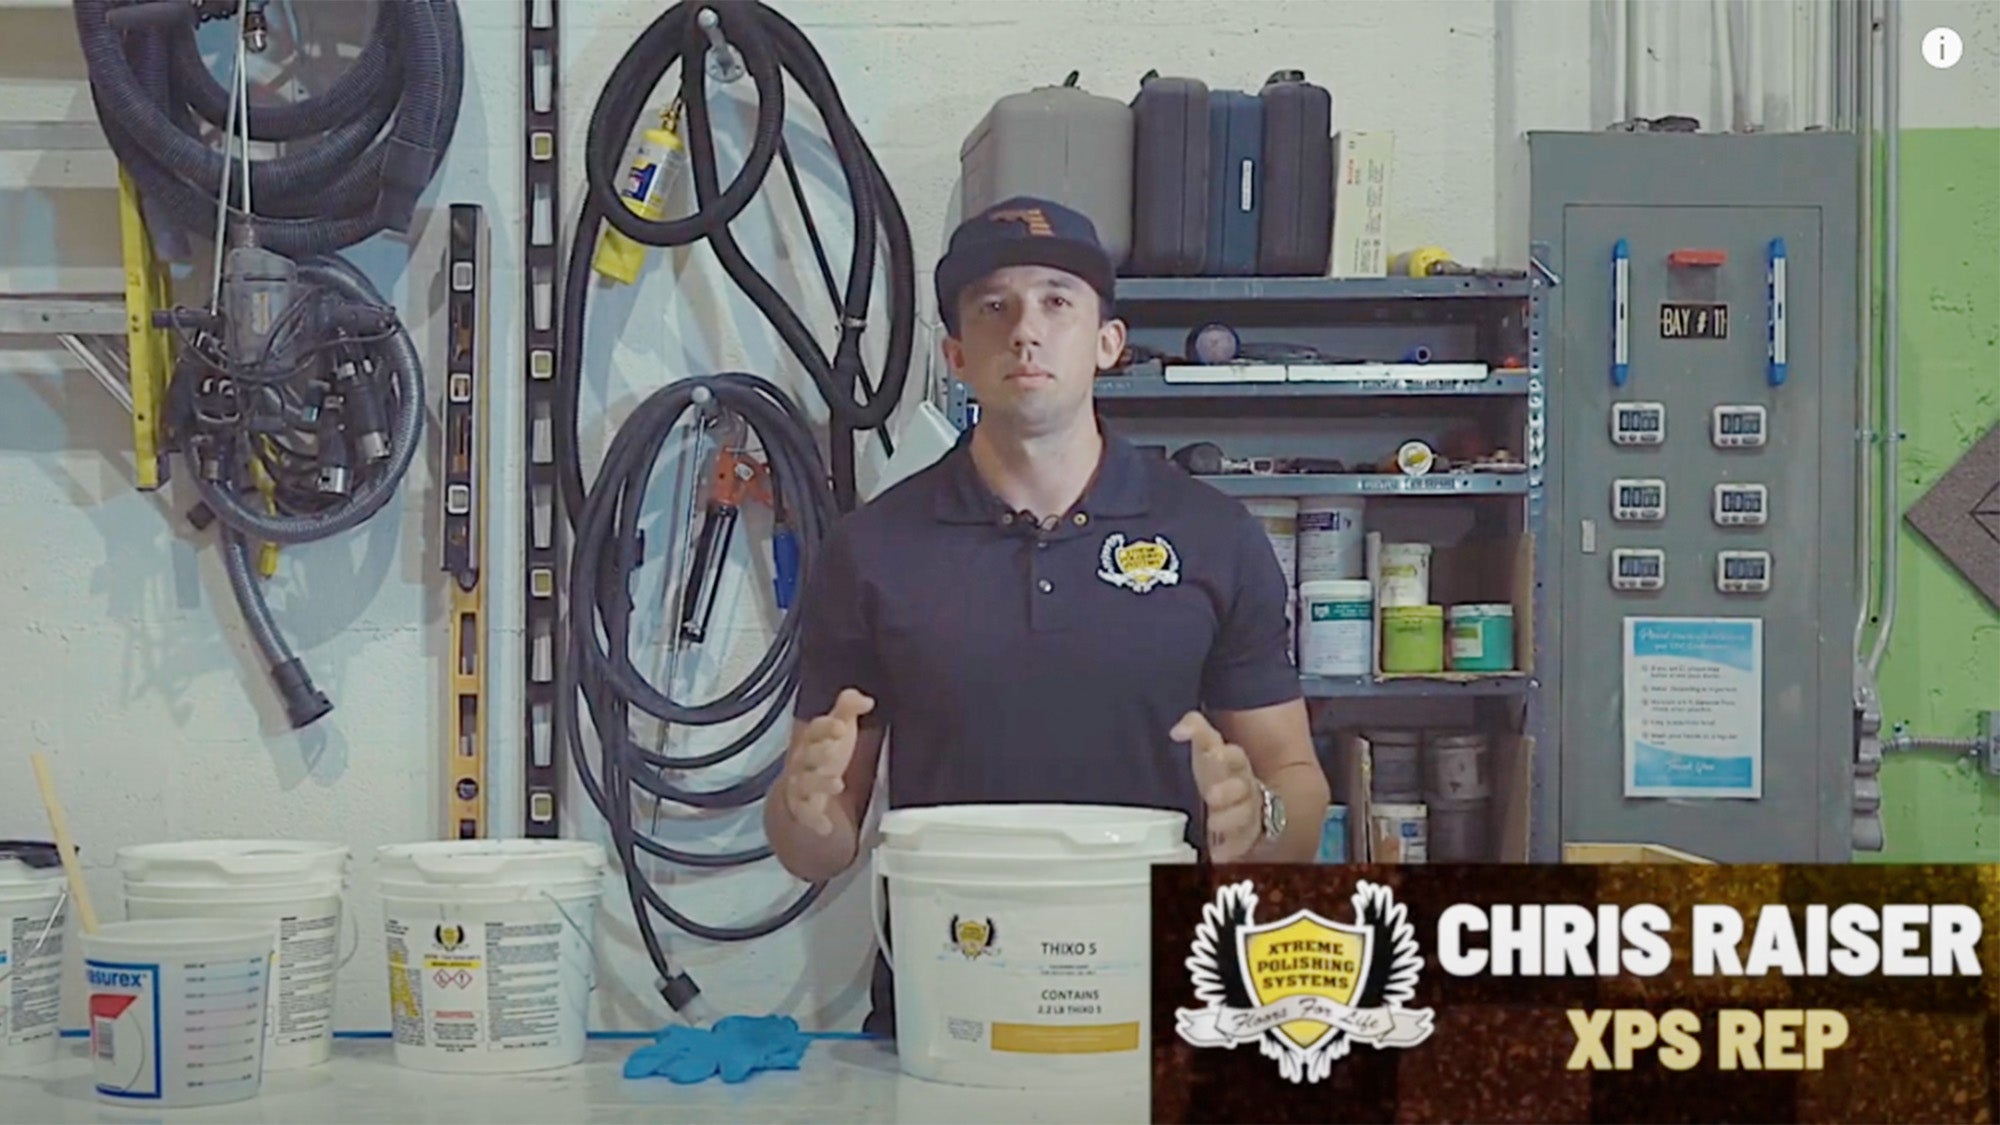 Video - XPS expert explains how to prep mix and apply thixofix adhesive